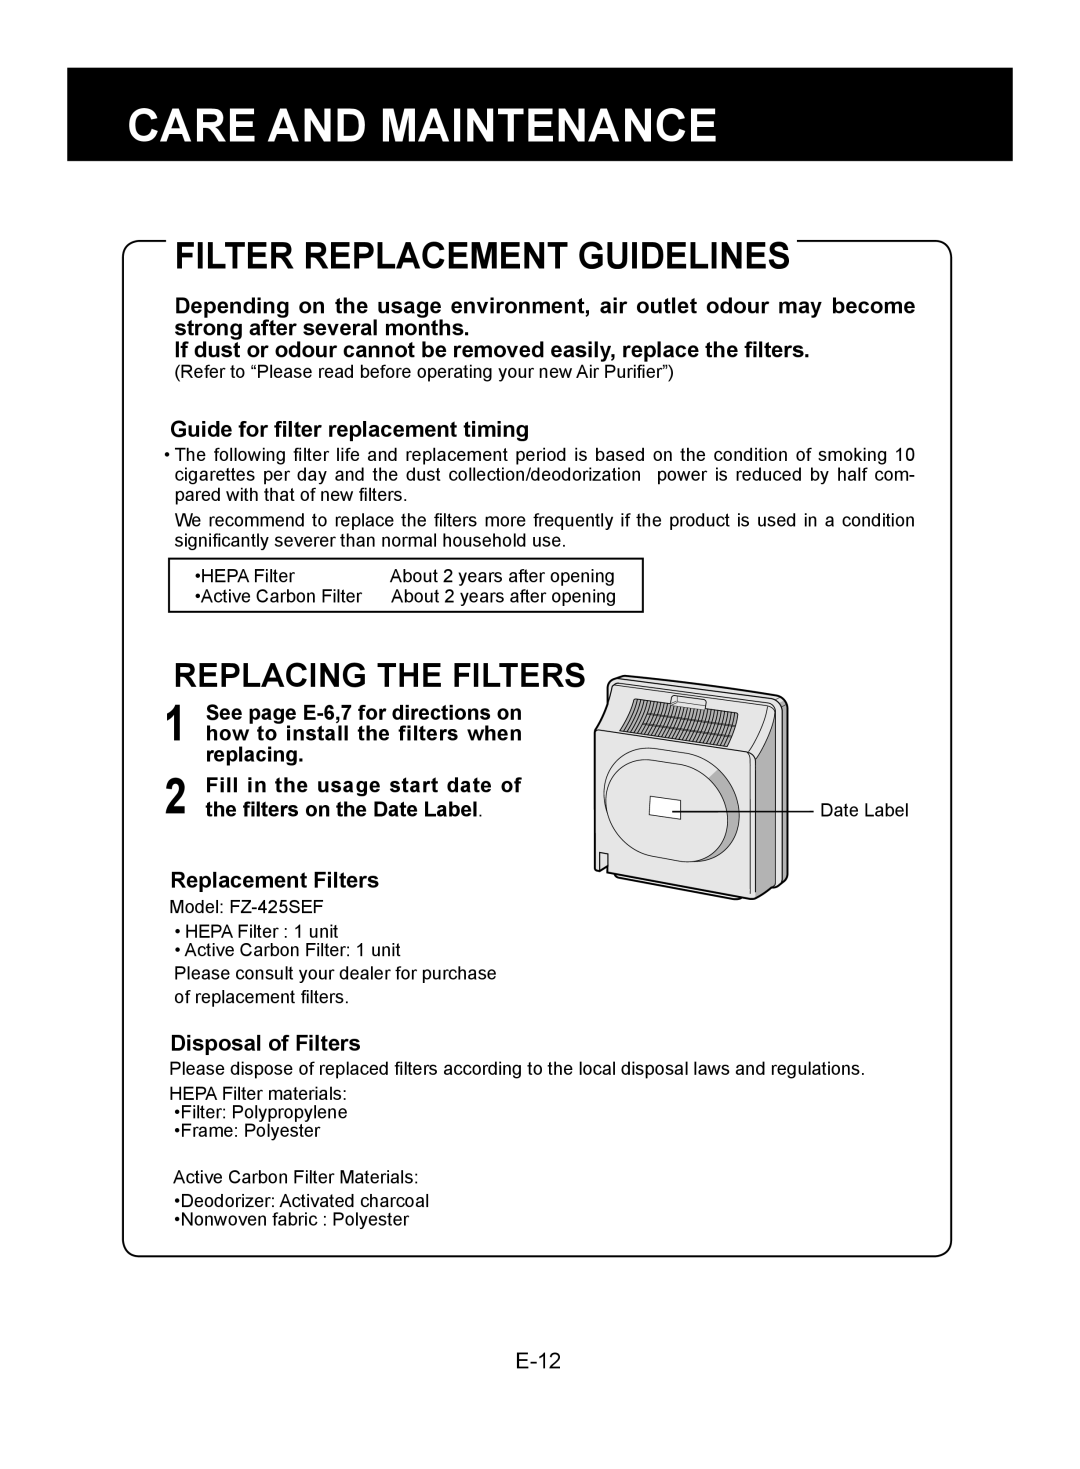 Sharp FU-W28E Filter Replacement Guidelines, Replacing The Filters, Guide for filter replacement timing, E-12, replacing 